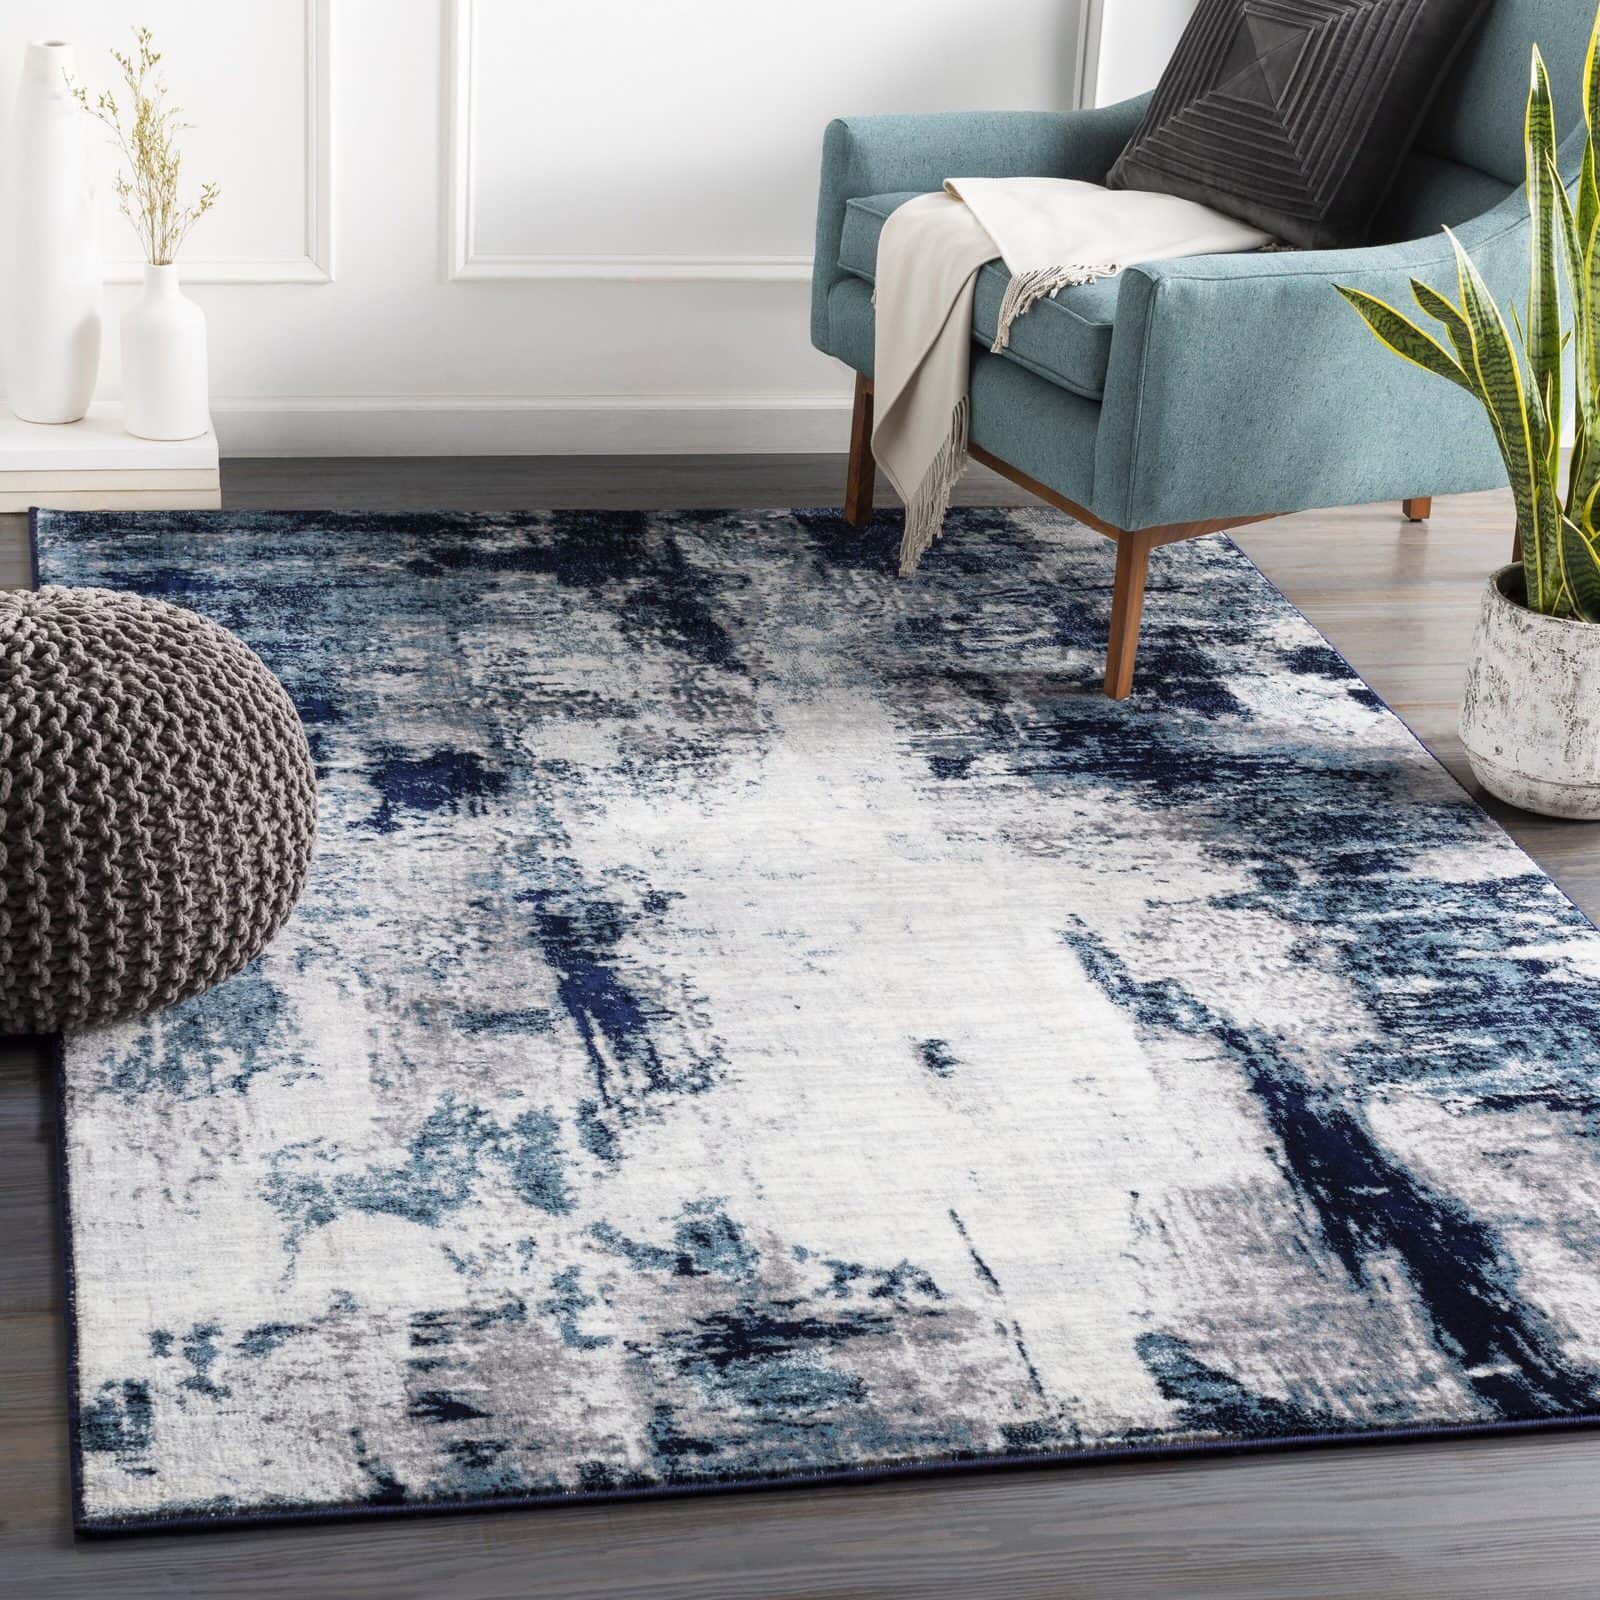 12 Best Navy Blue And White Rugs, Navy Blue And Cream Area Rugs